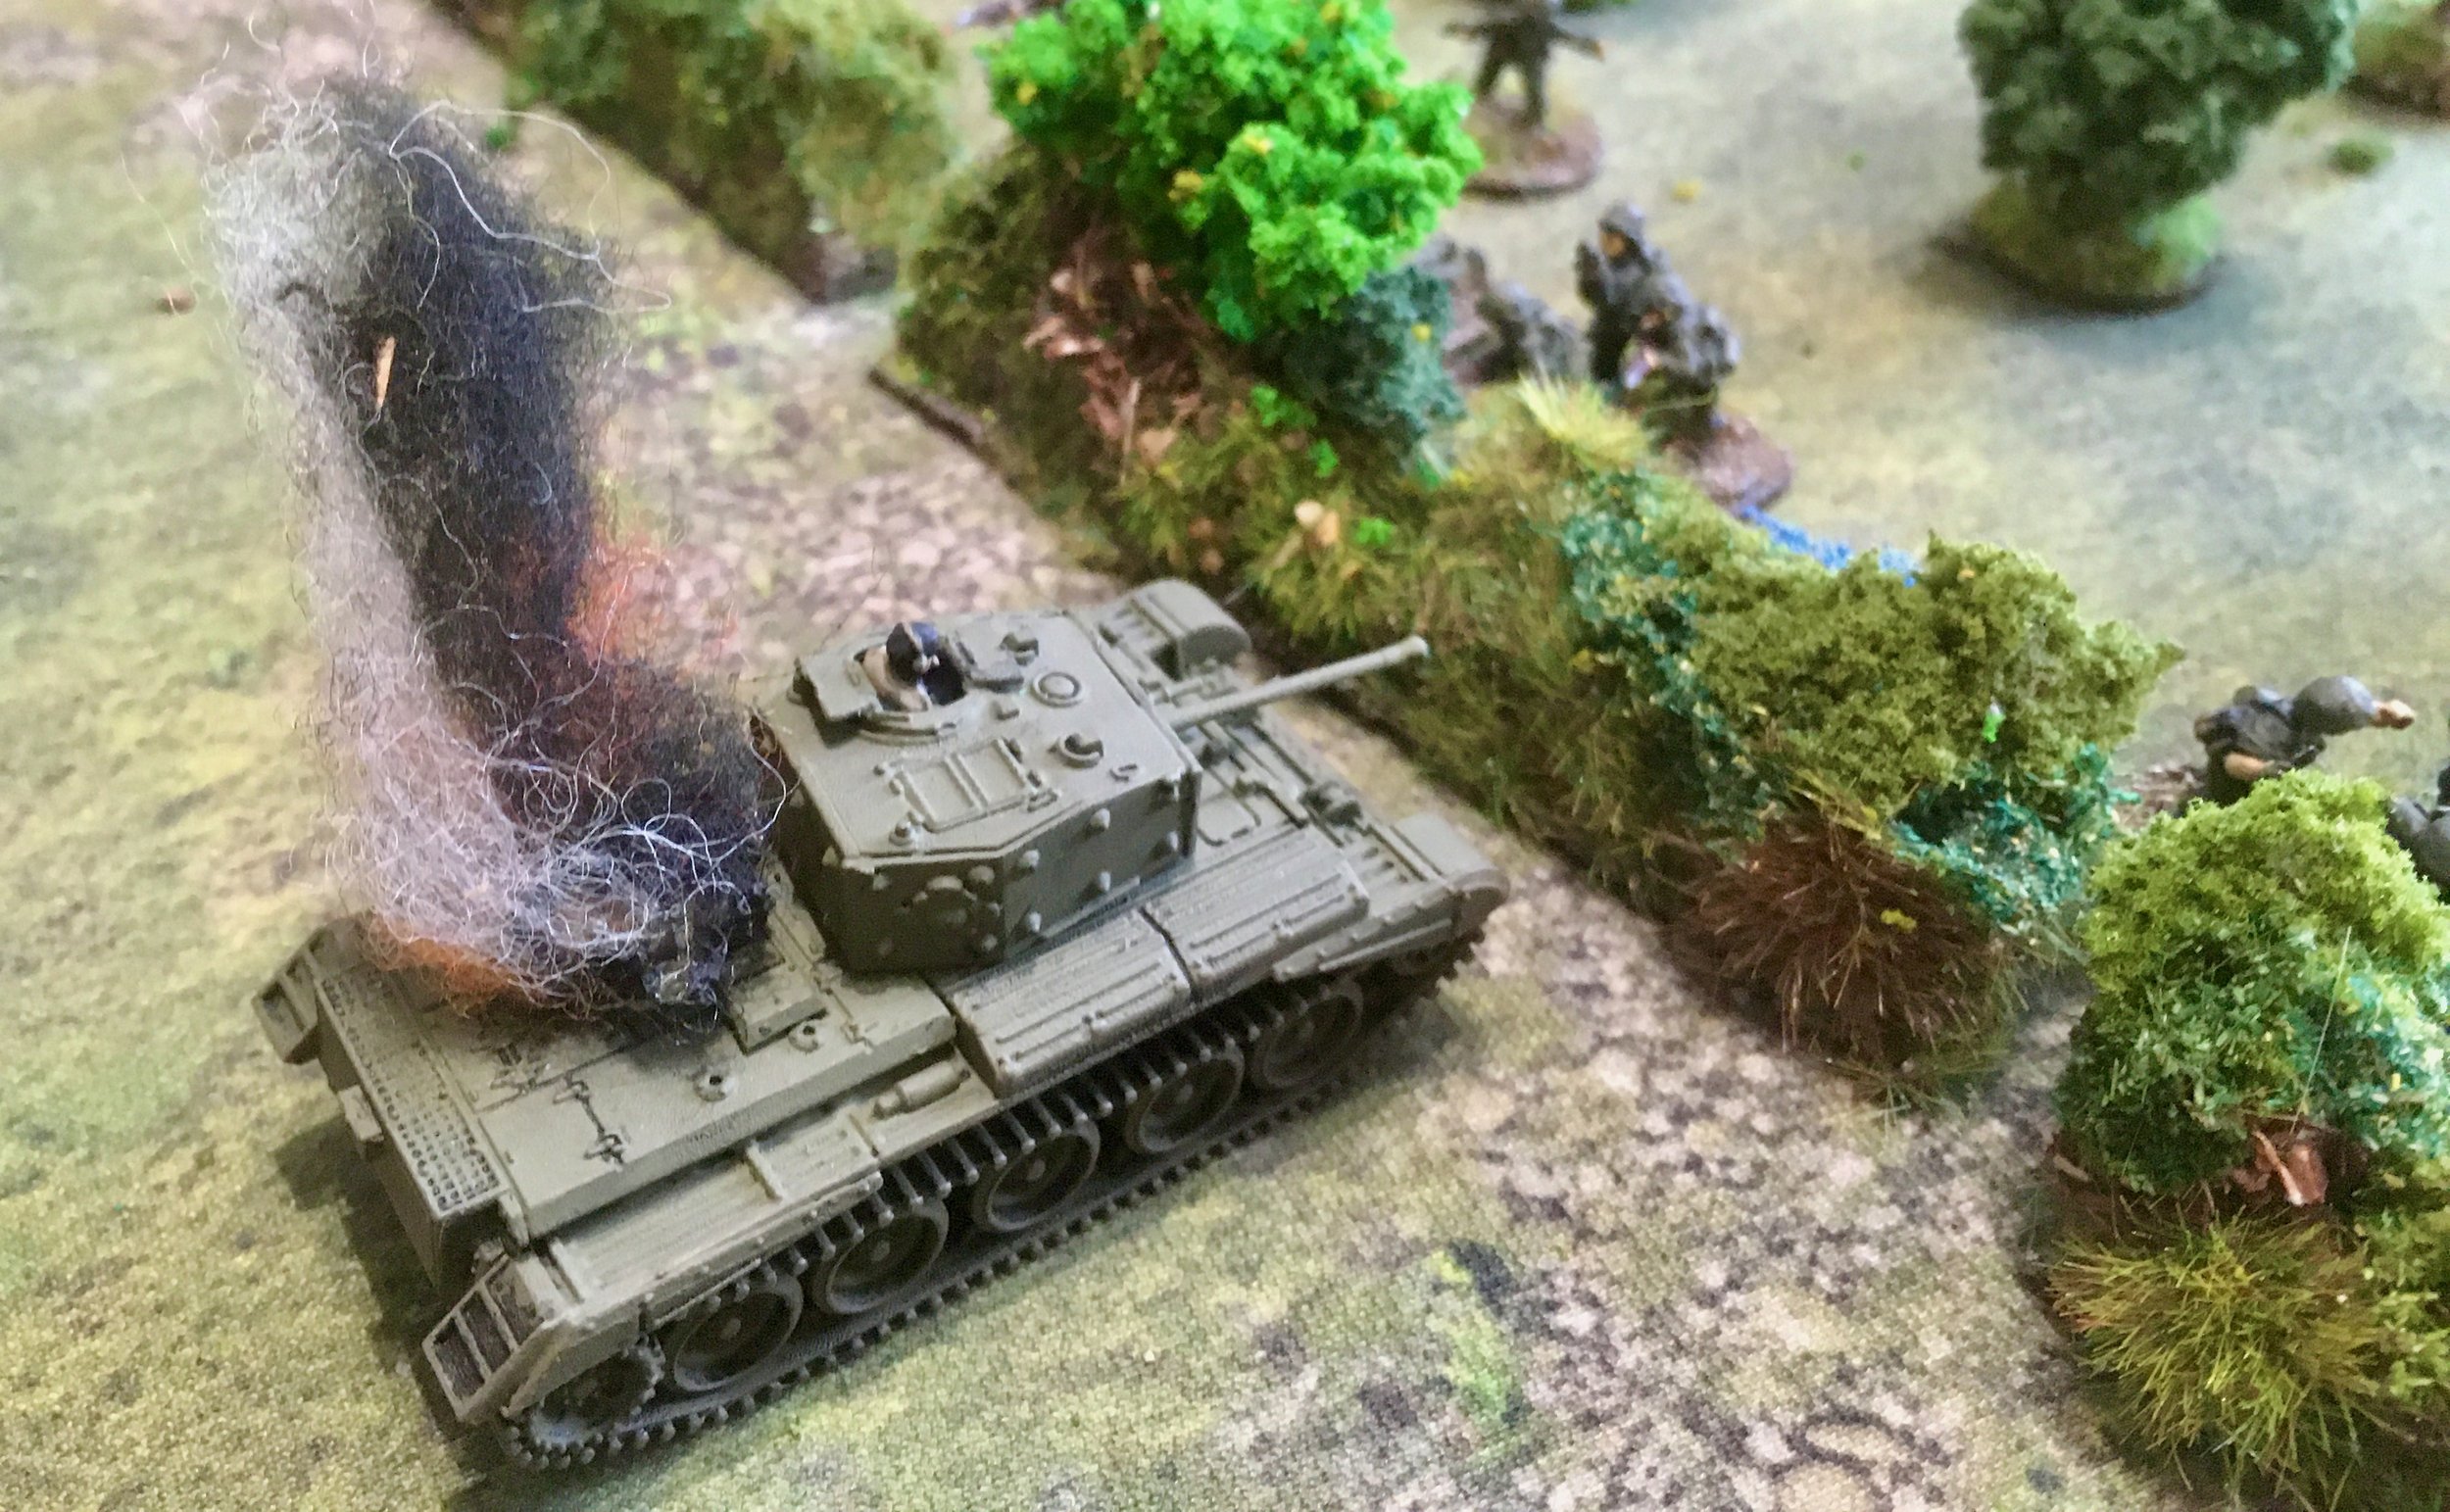 Two Cromwell's fell victim to panzerfausts...